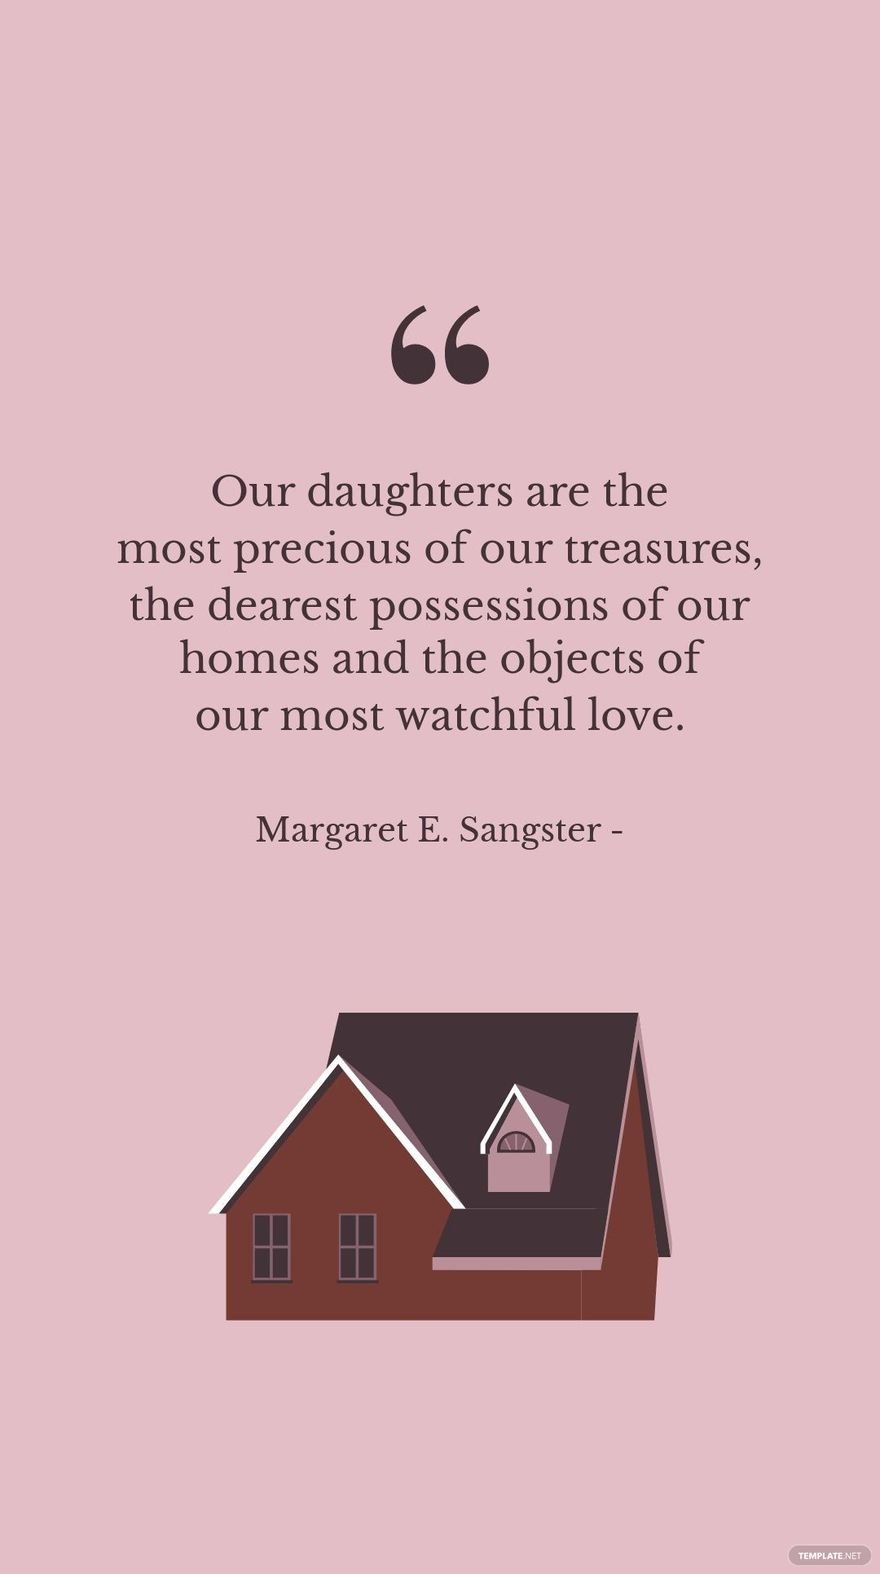 MARGARET E. SANGSTER - Our daughters are the most precious of our treasures, the dearest possessions of our homes and the objects of our most watchful love.